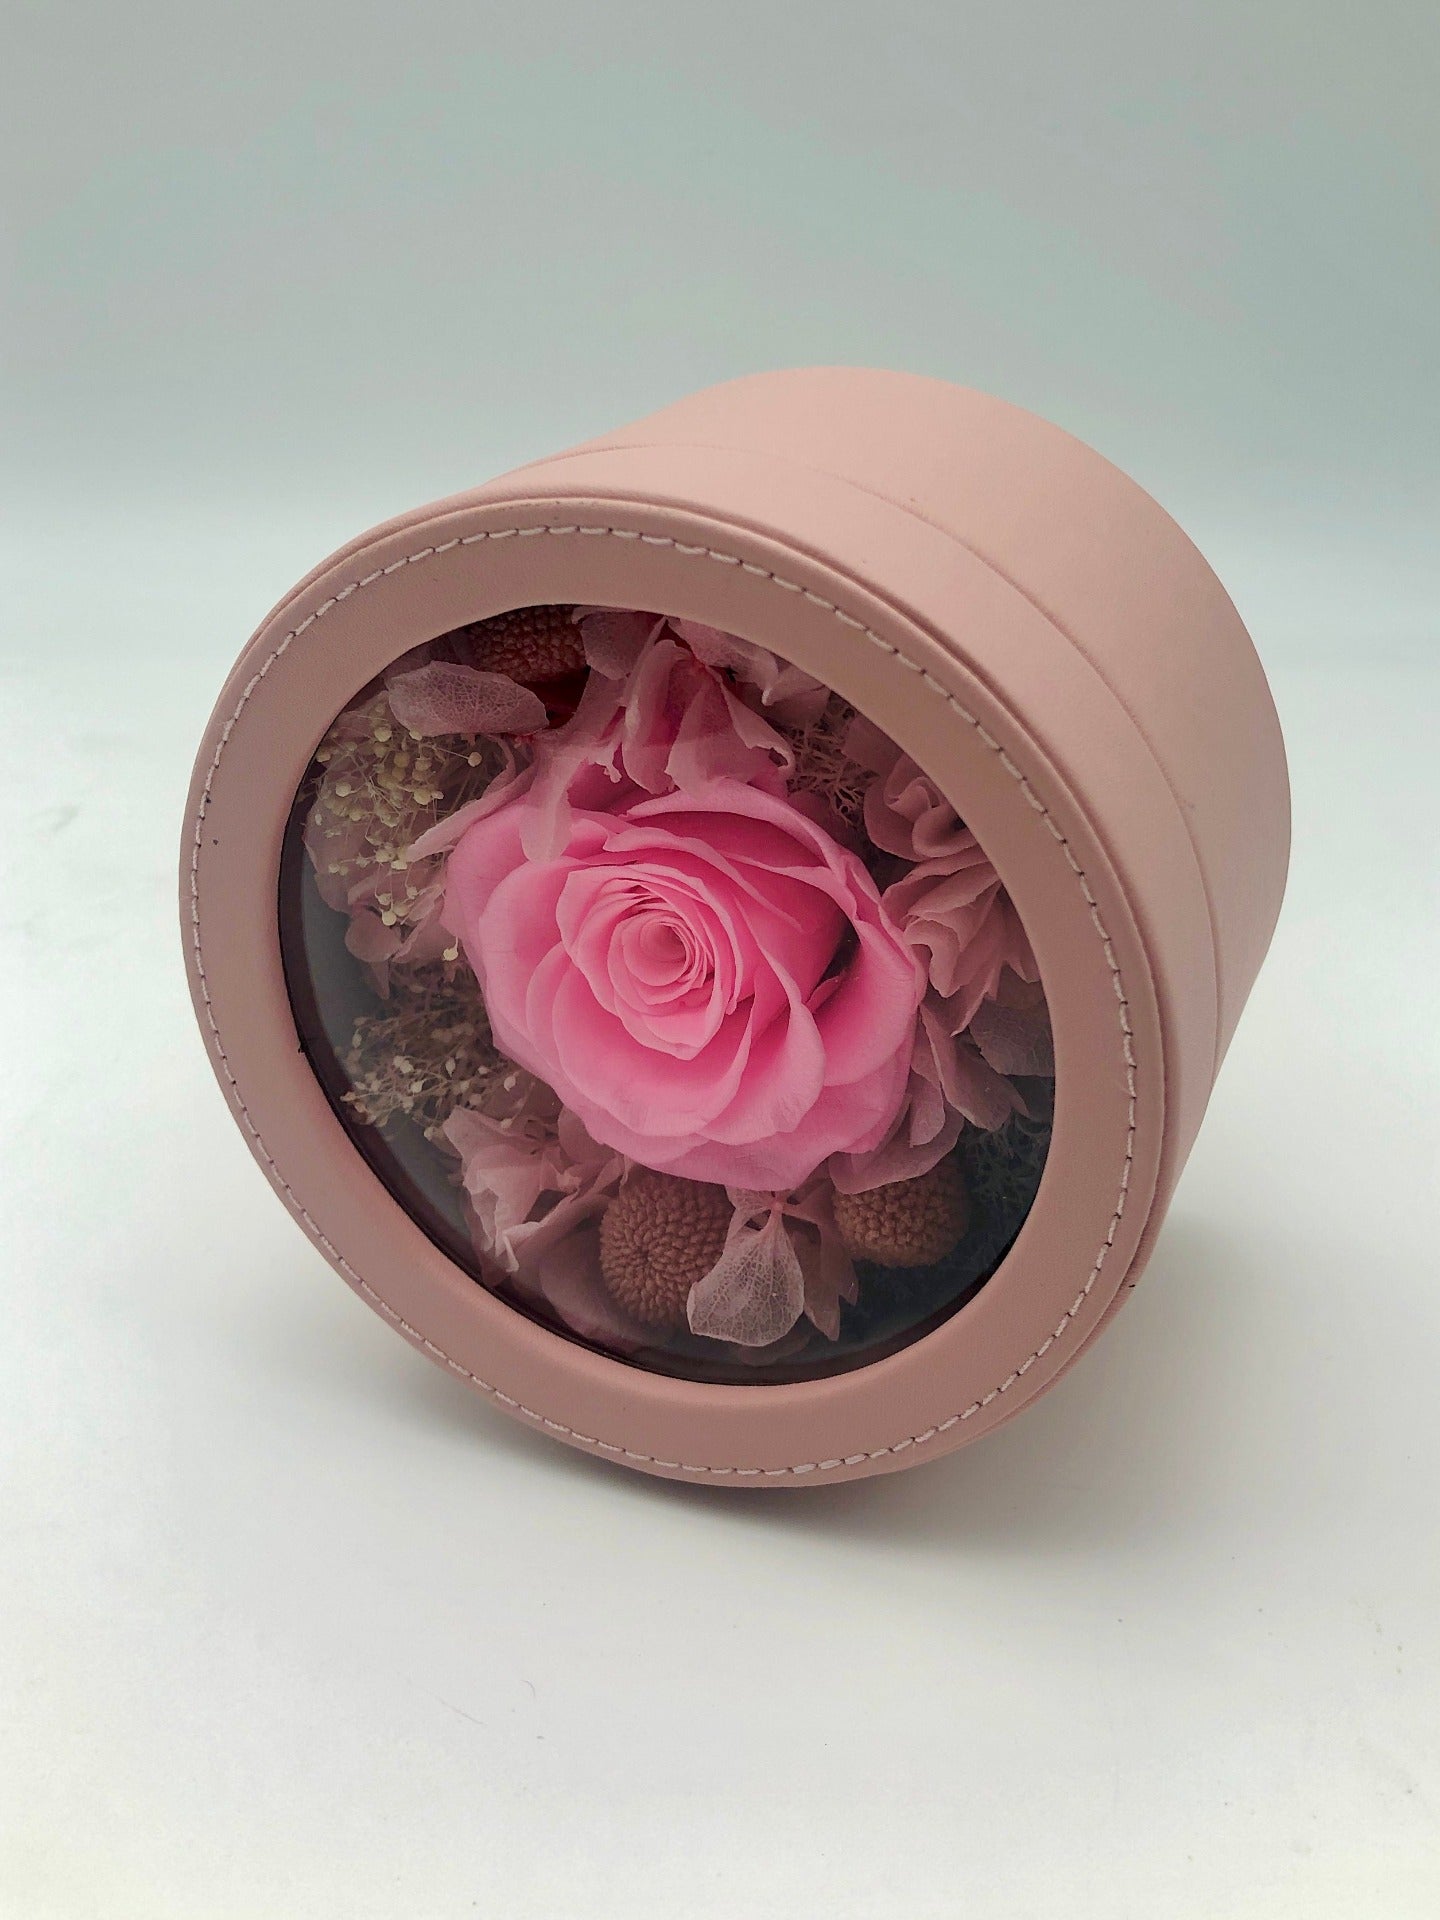 A photo of a beautiful pink rose preserved in a round pink gift box. The rose is complemented by small, dried brown flowers, creating a charming and timeless gift perfect for any occasion.